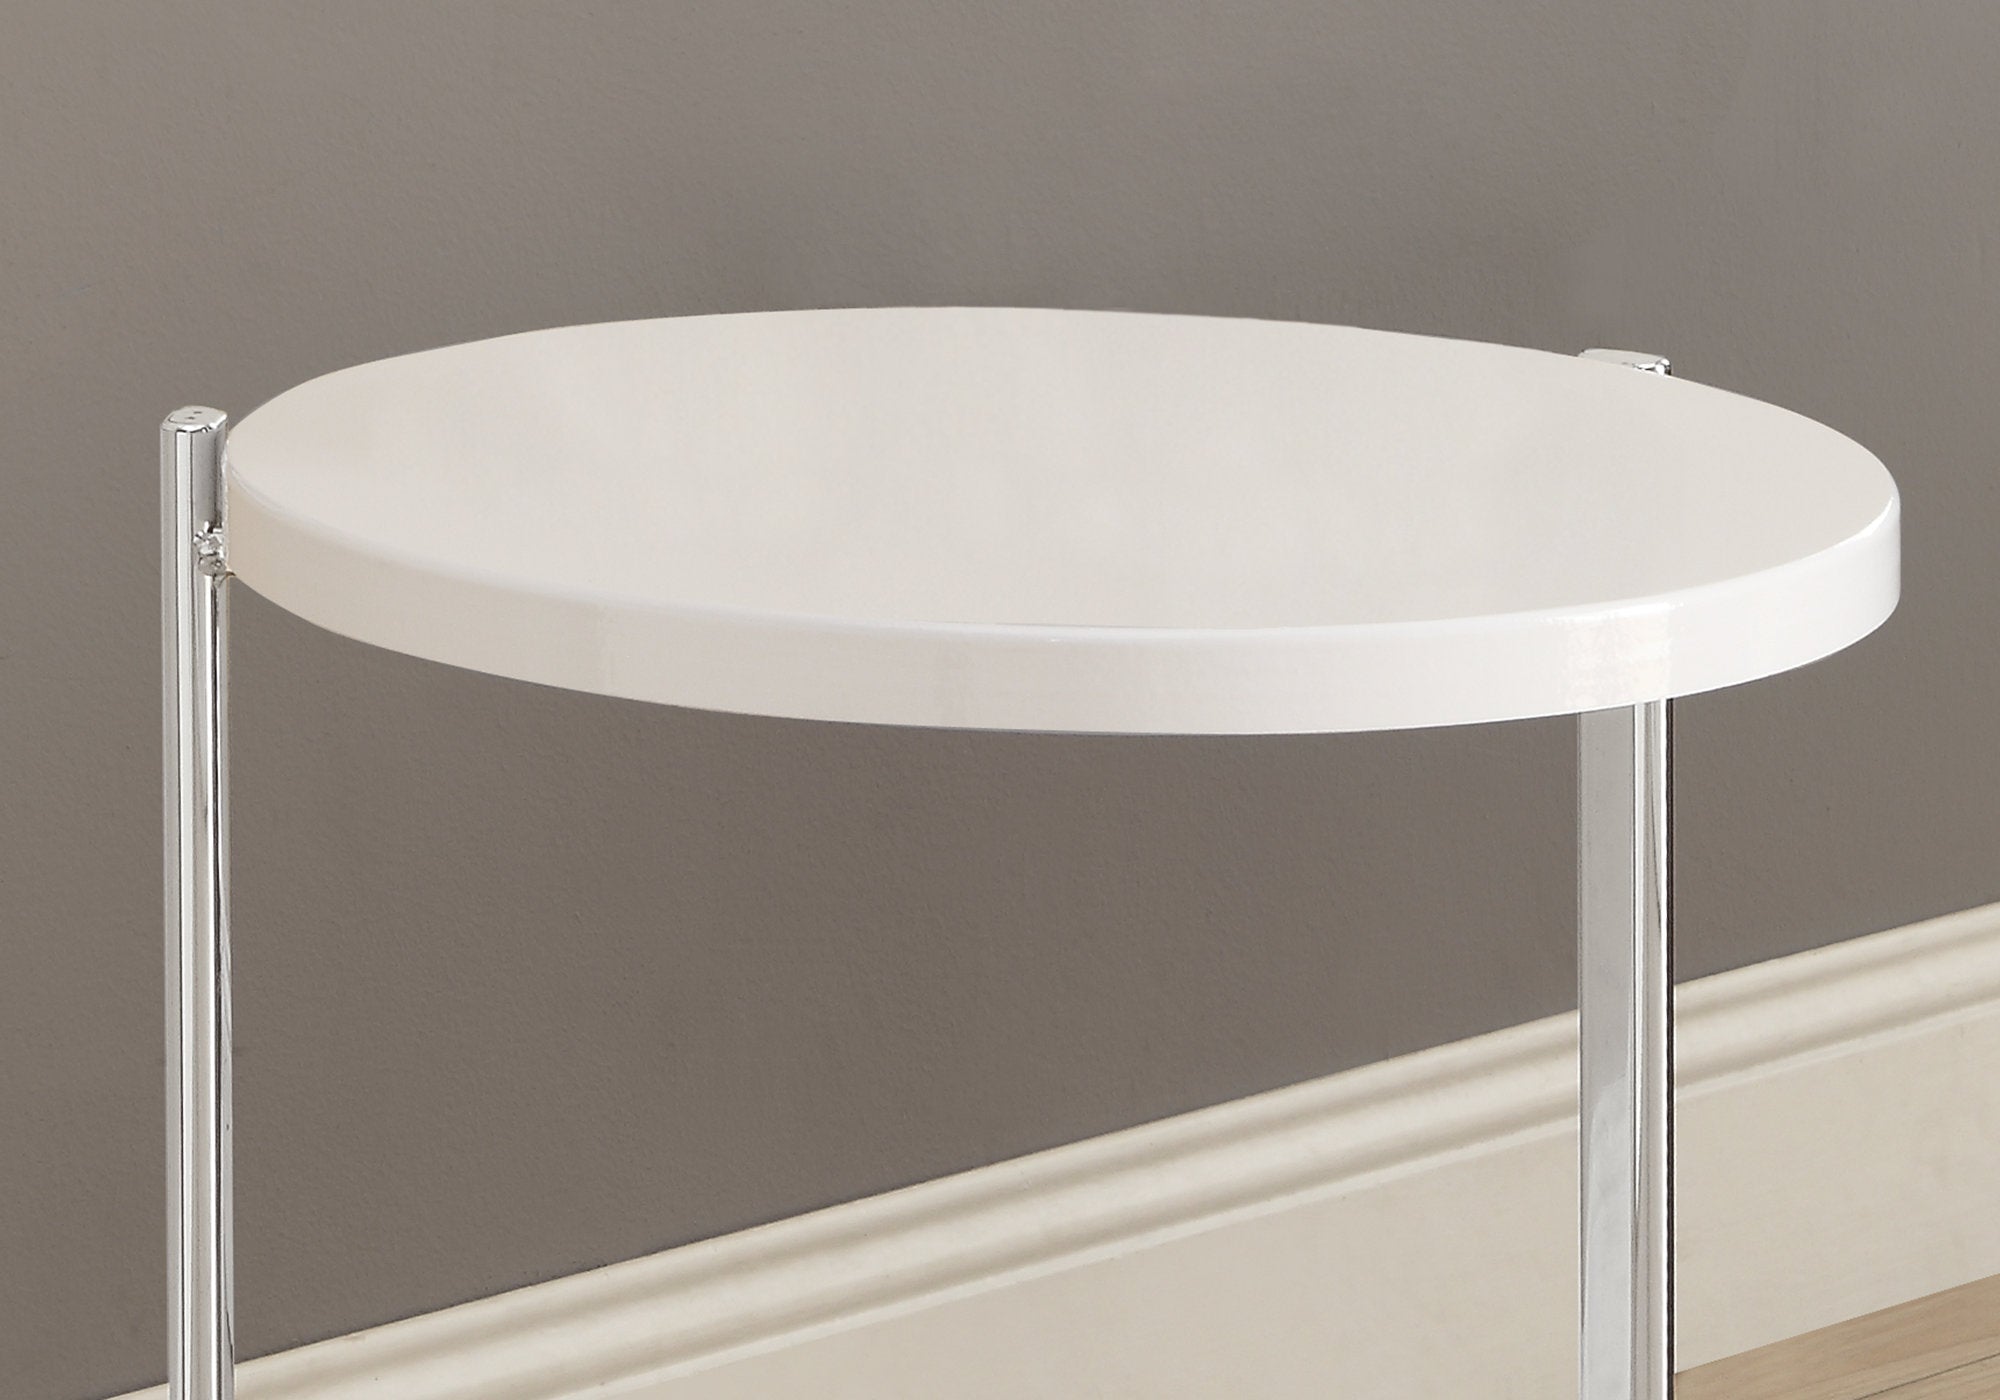 Accent Table - Glossy White / Chrome Metal